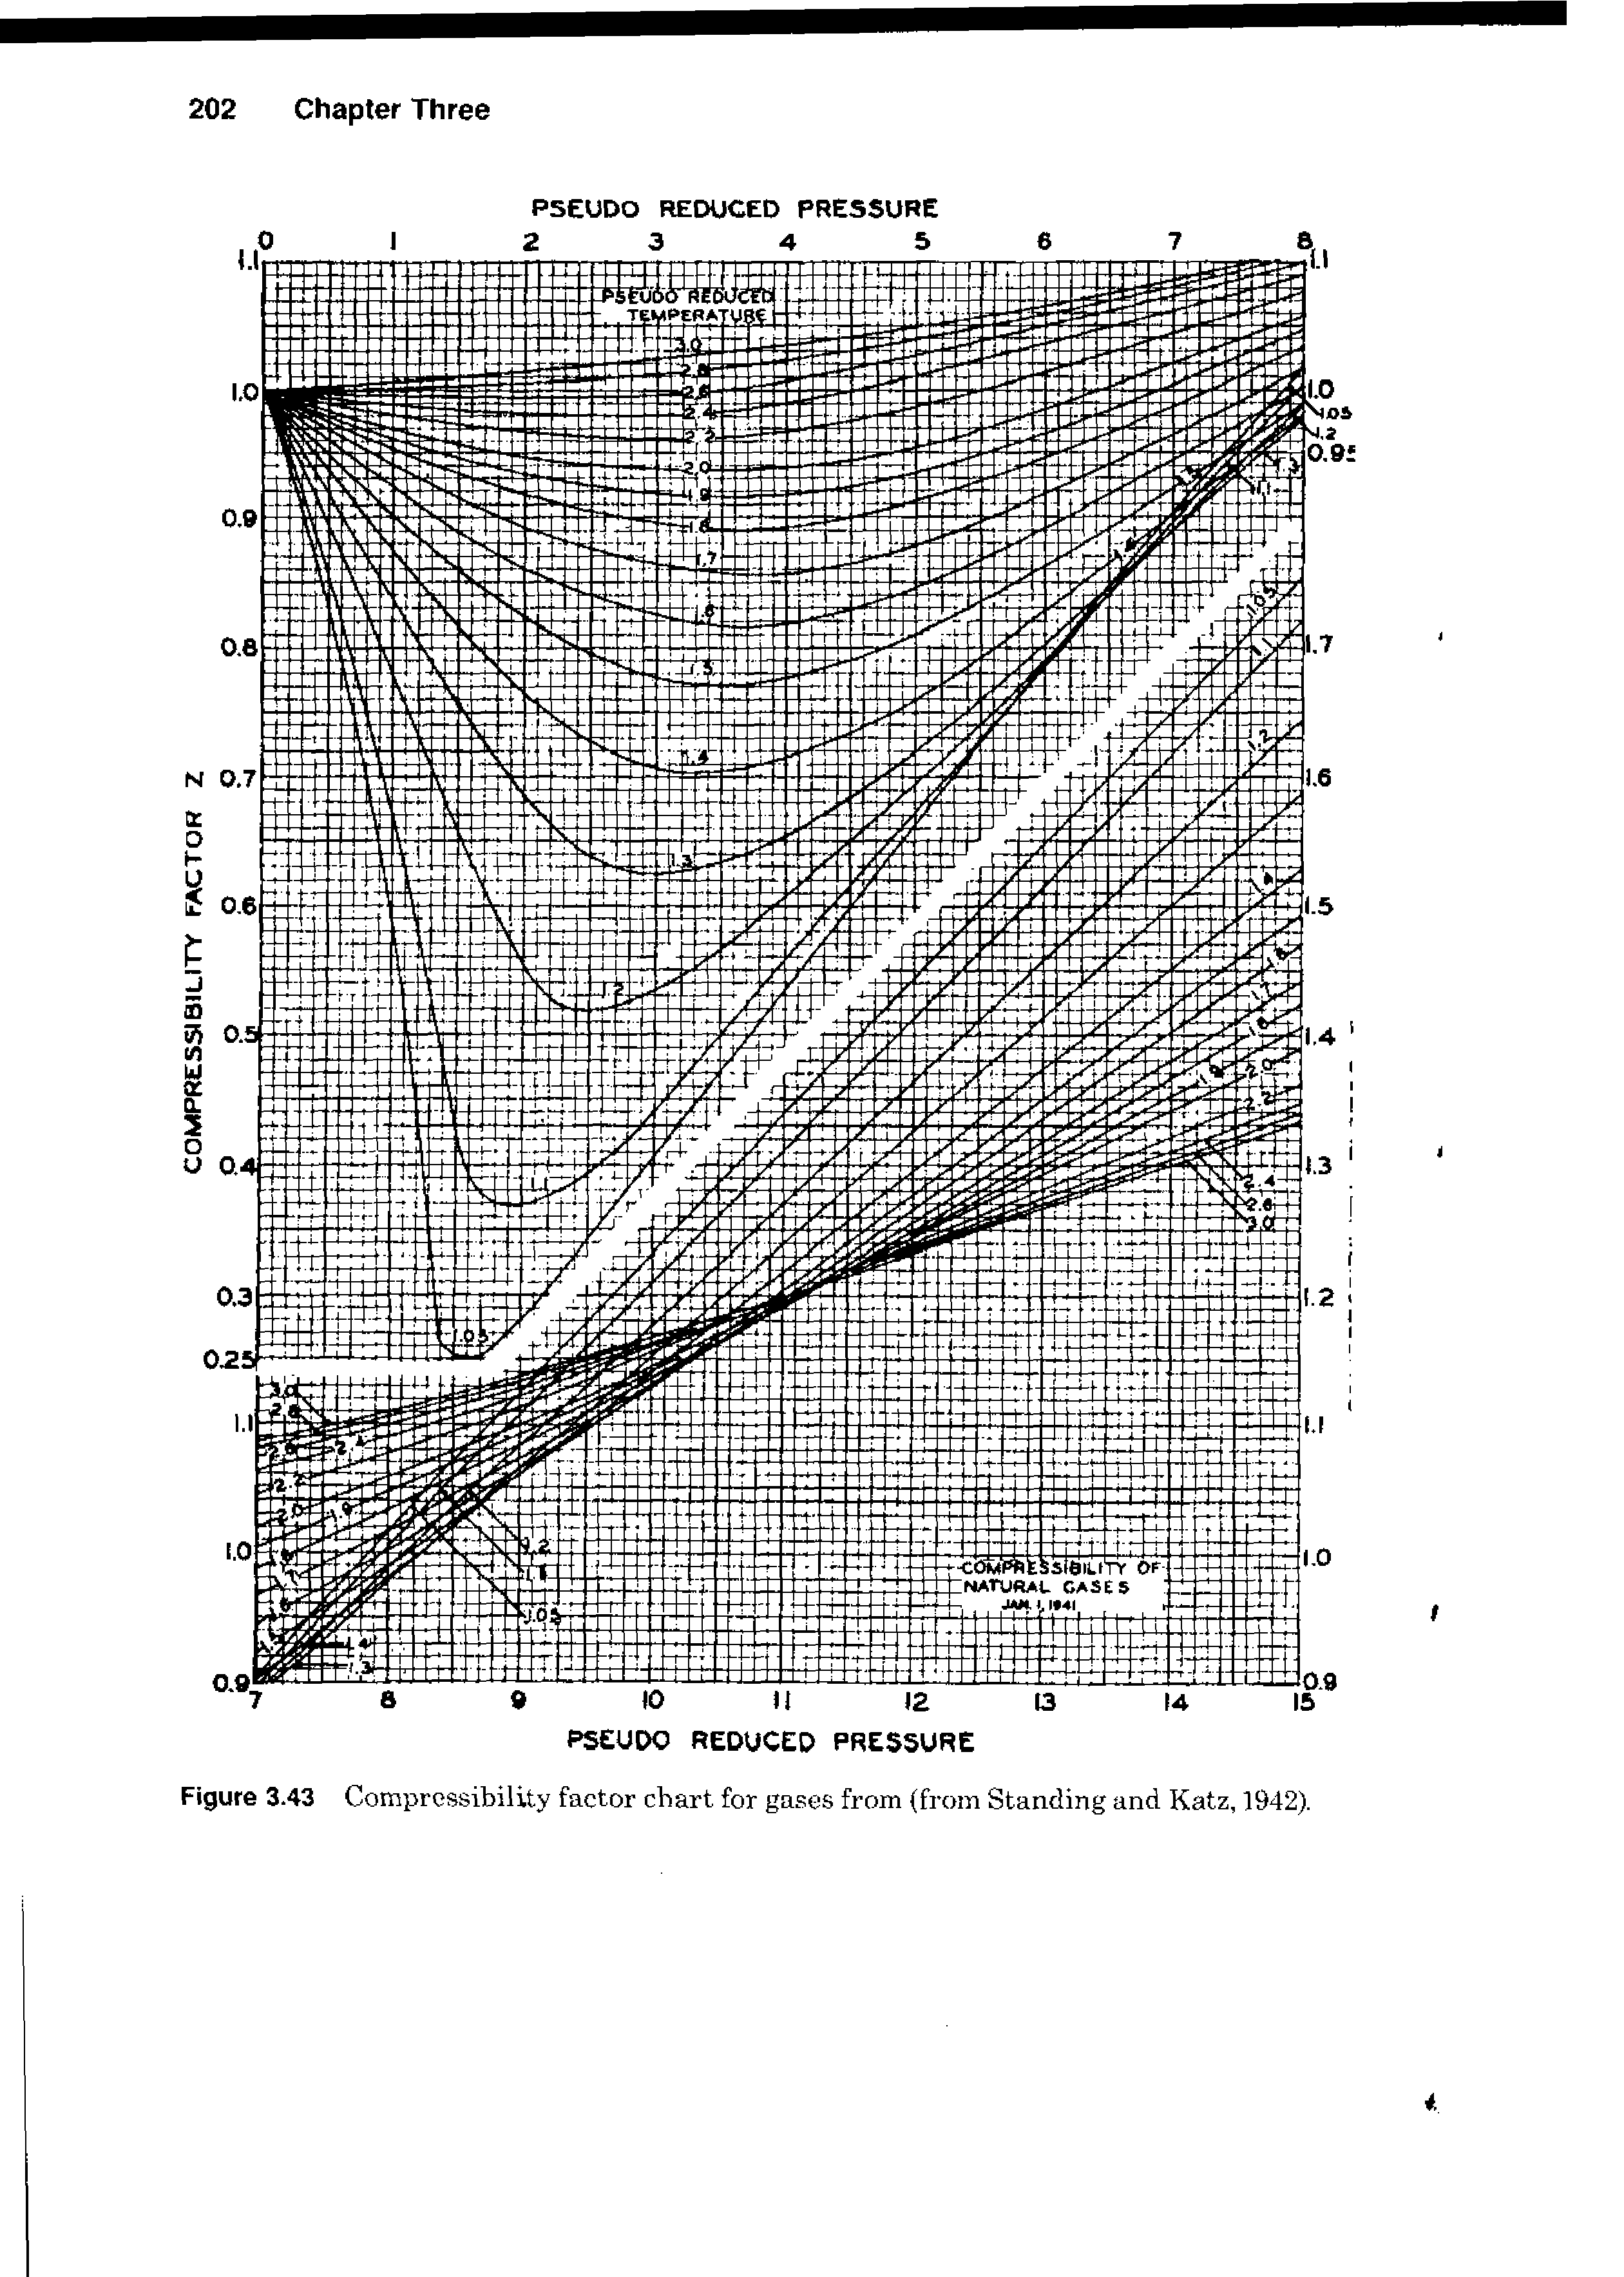 Figure 3.43 Compressibility factor chart for gases from (from Standing and Katz, 1942).